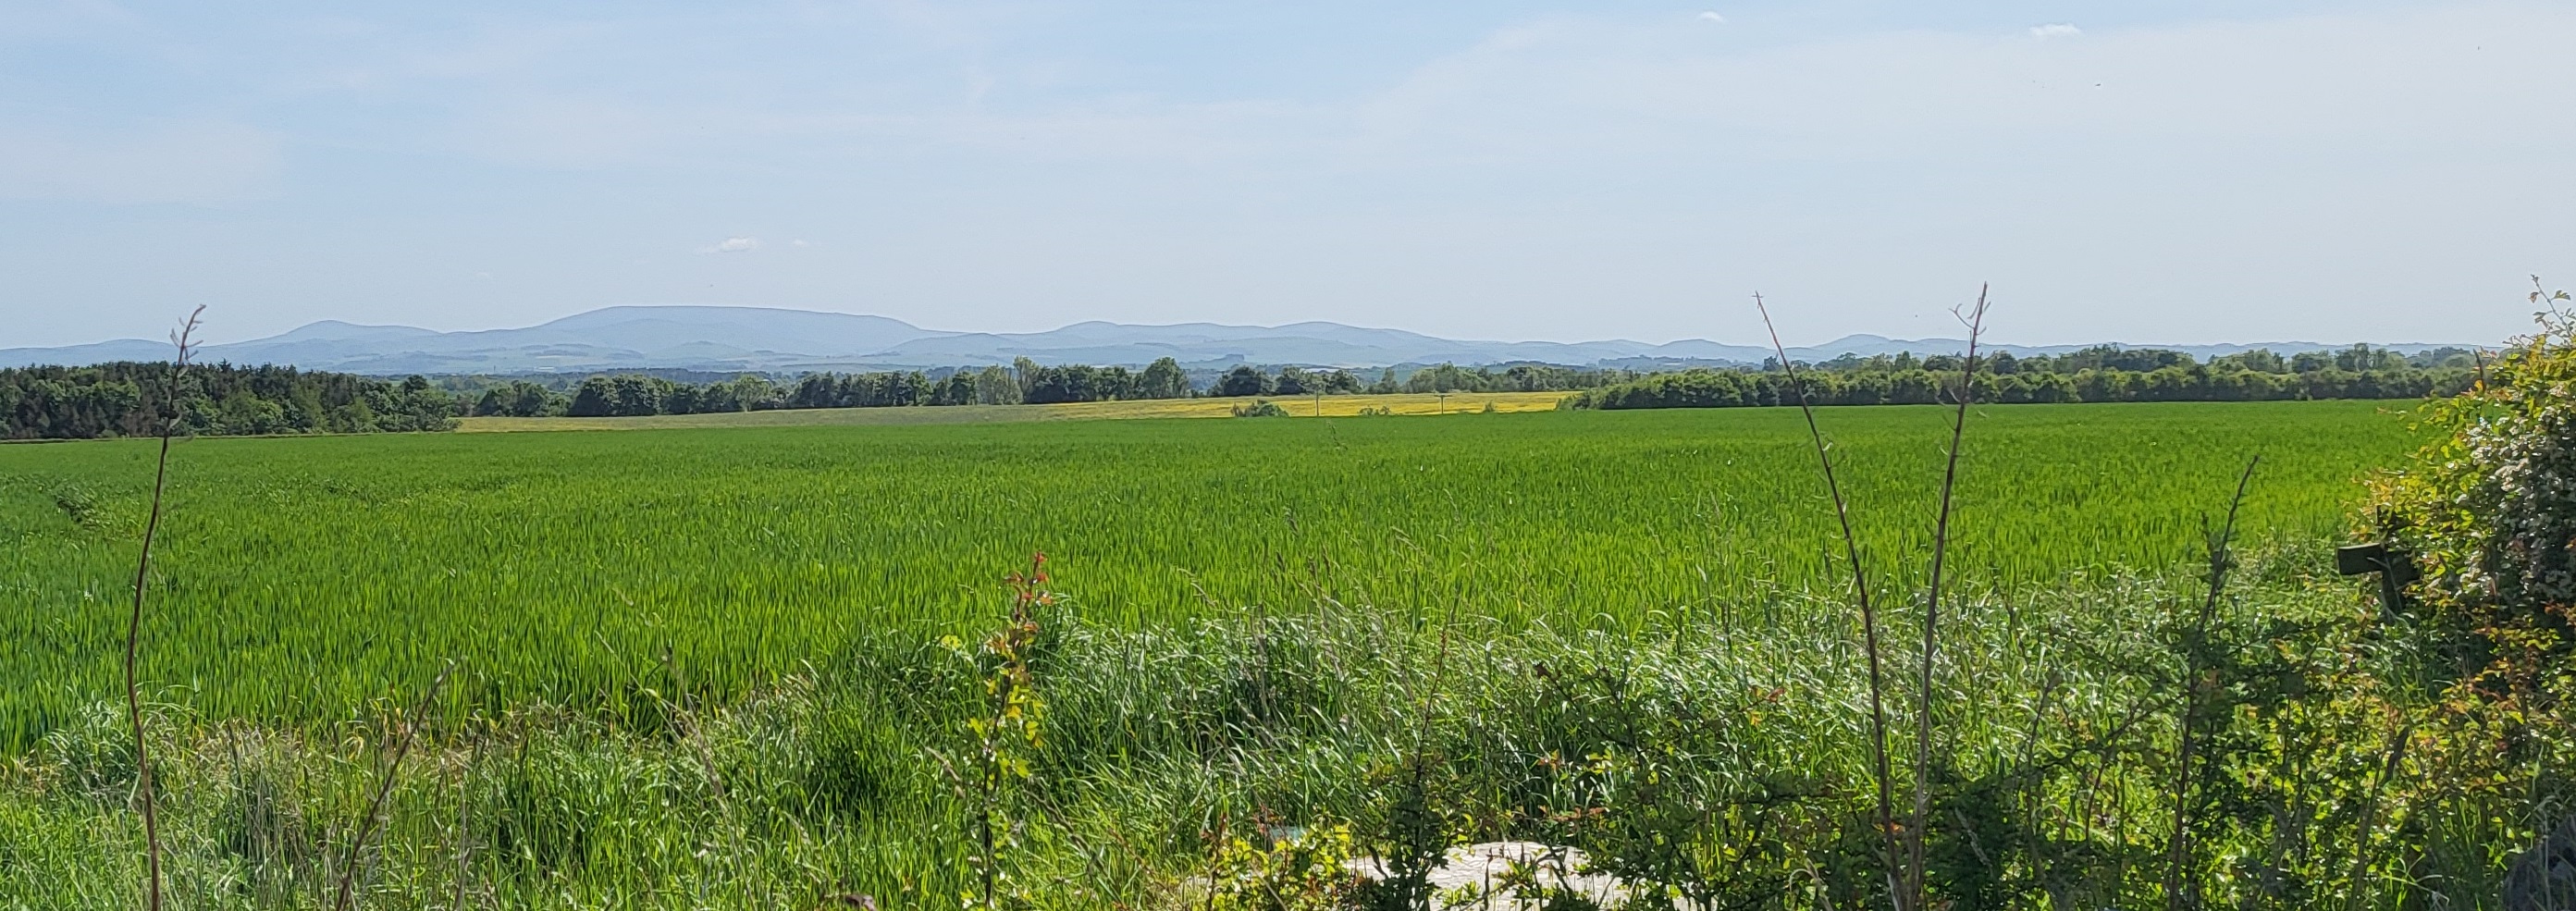 Field with Cheviot Hills in distance, as viewed from the Scottish borders